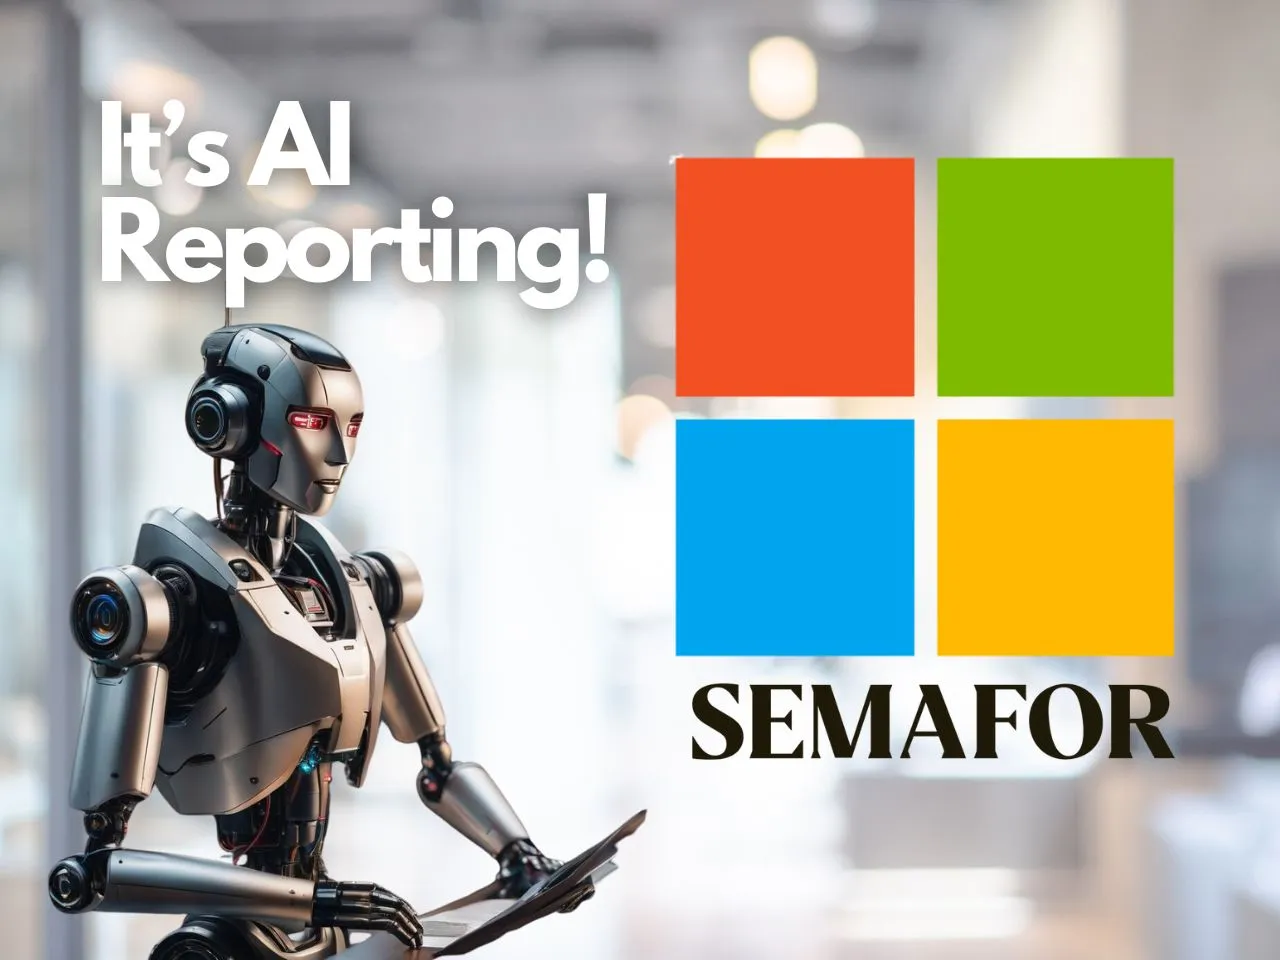 Microsoft Partners With Startup Revolutionize News Reporting with AI